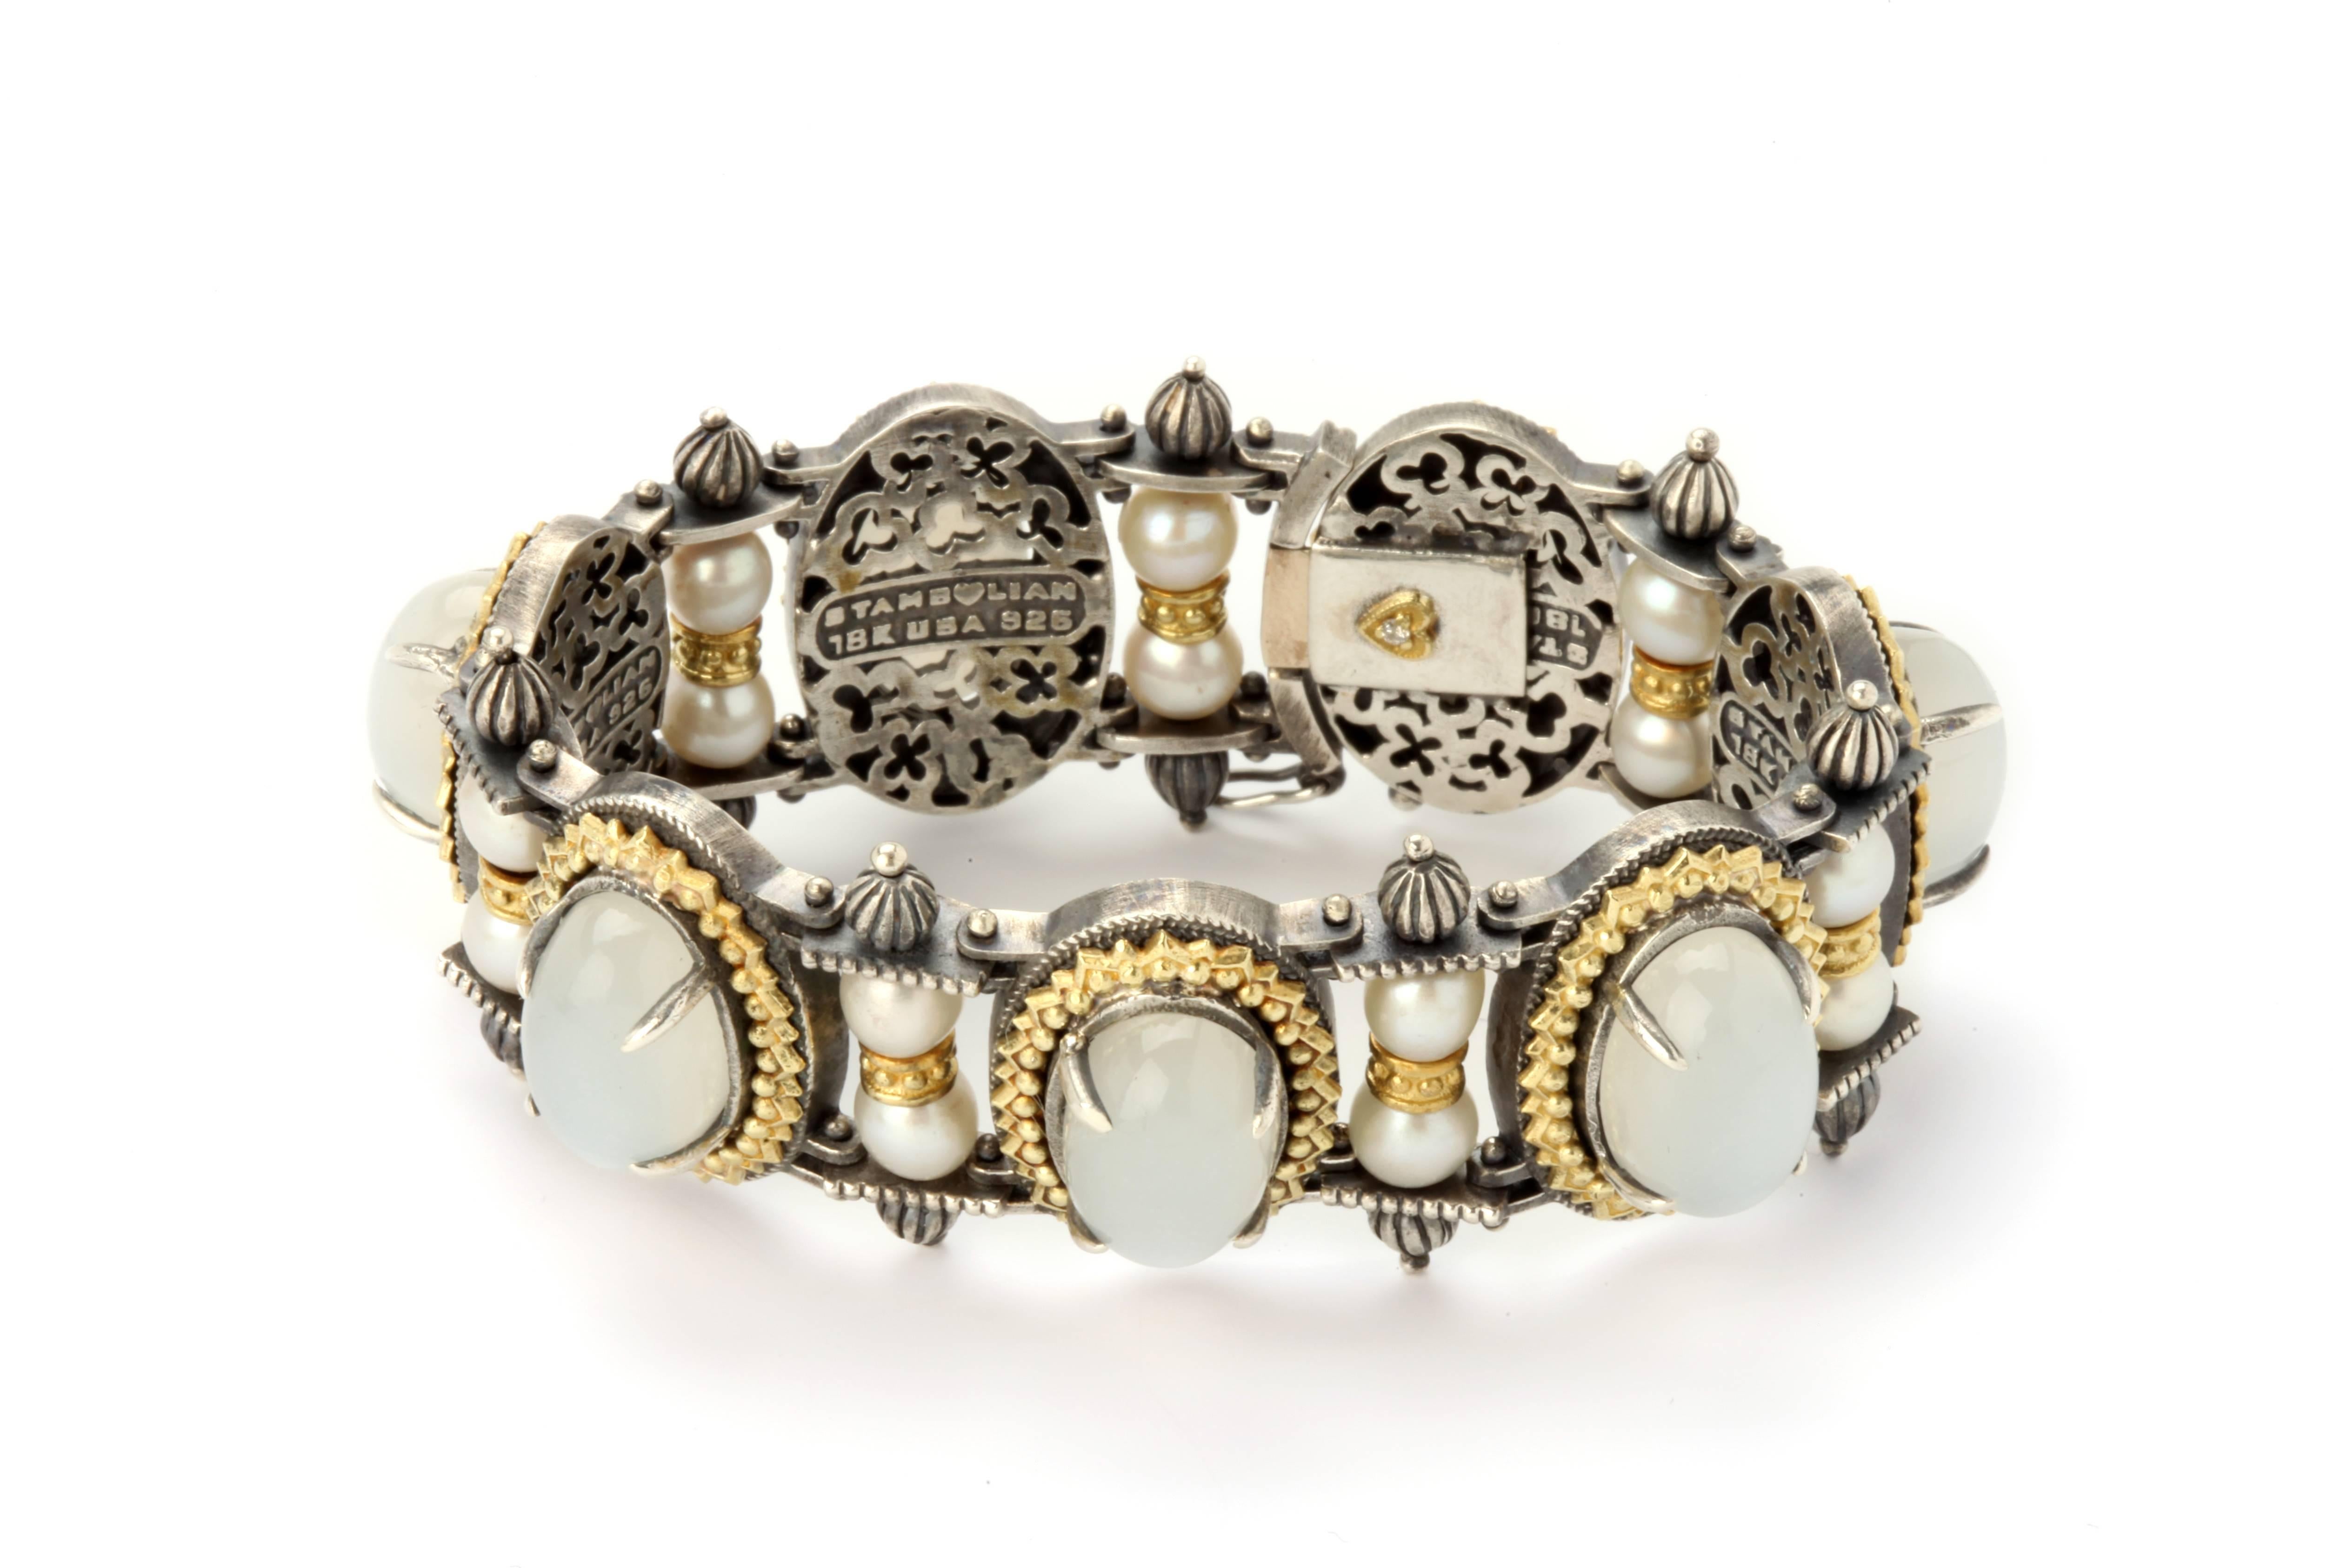 Aged Silver & 18k Gold Bracelet with Moonstones and pearls

53 ct. Moonstones, 7 total
 
In between each section is a pair of pearls 

7 inches in length
1 inch wide

Push Botton Clasp

Signed STAMBOLIAN with our Trademark "Diamond